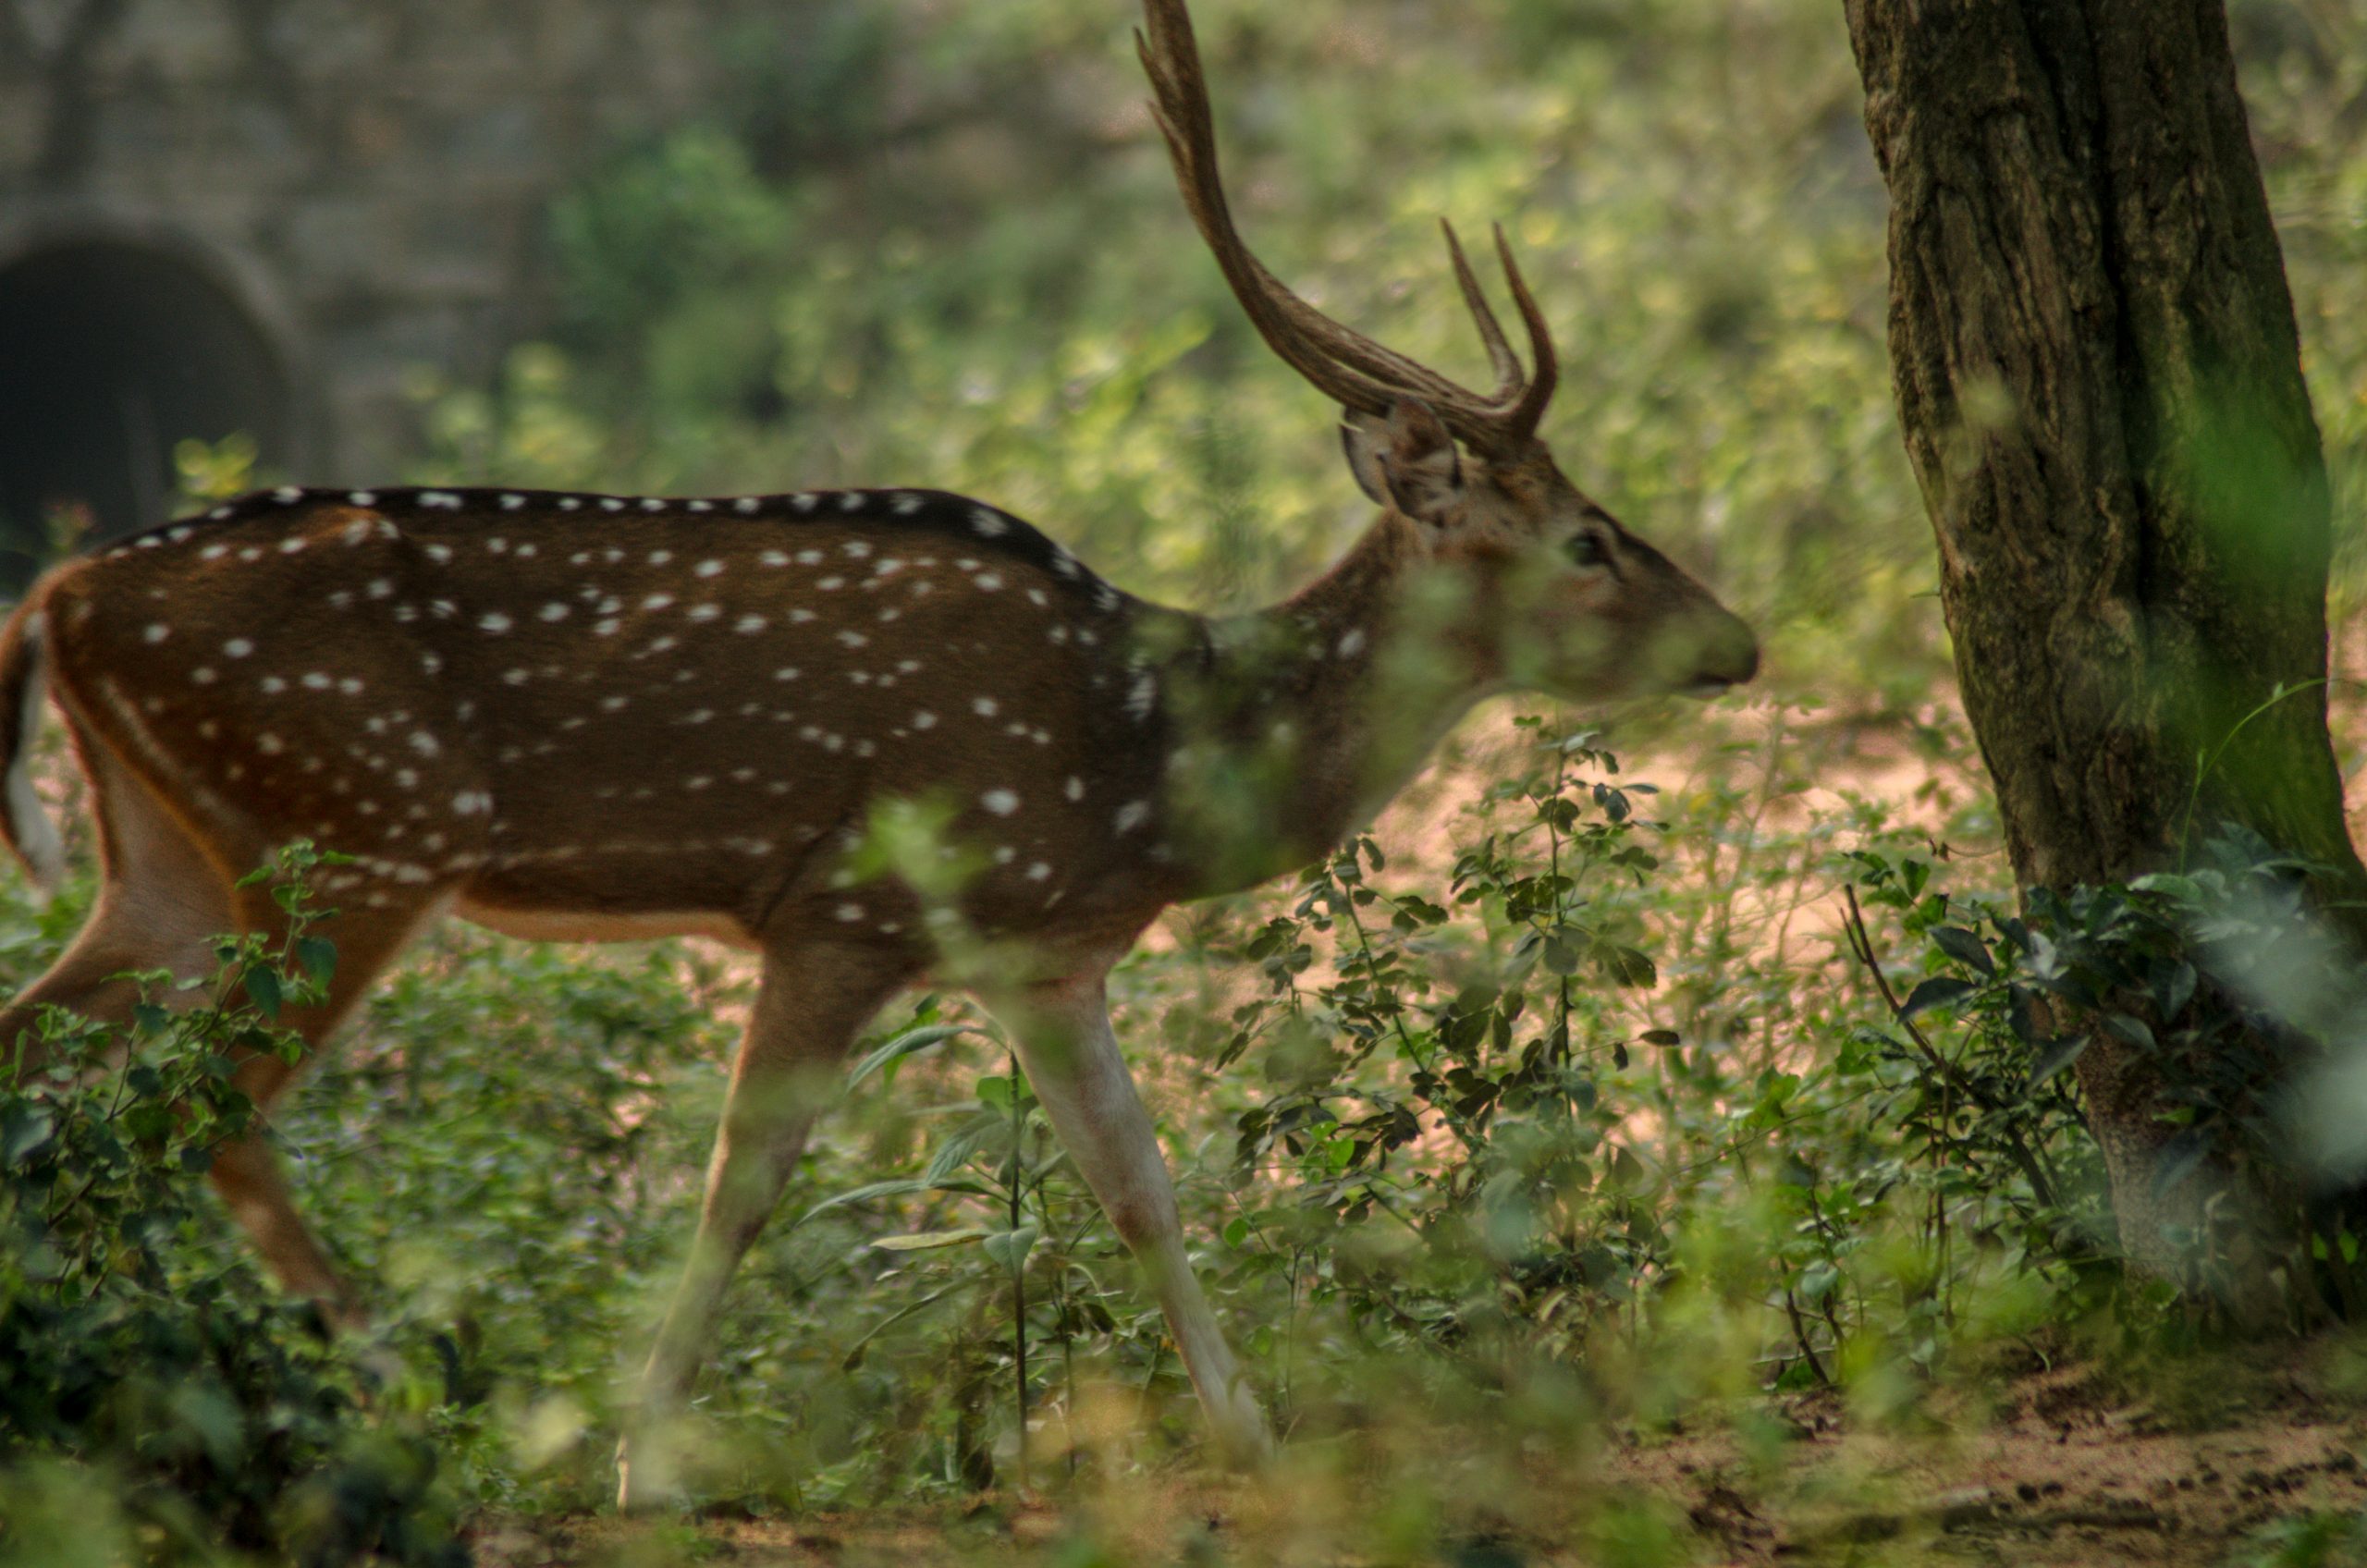 Indian Spotted Deer